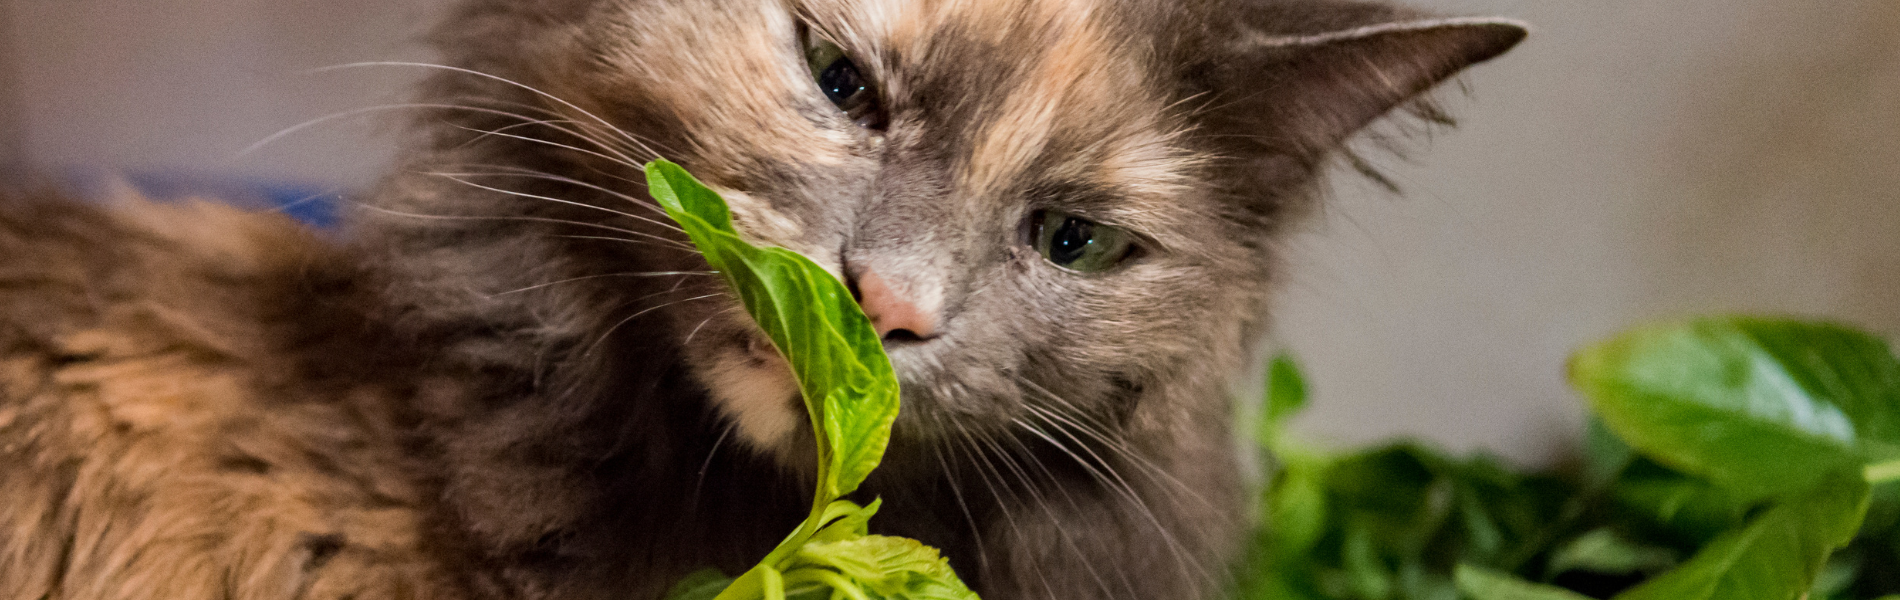 plantes sauvages comestibles chat